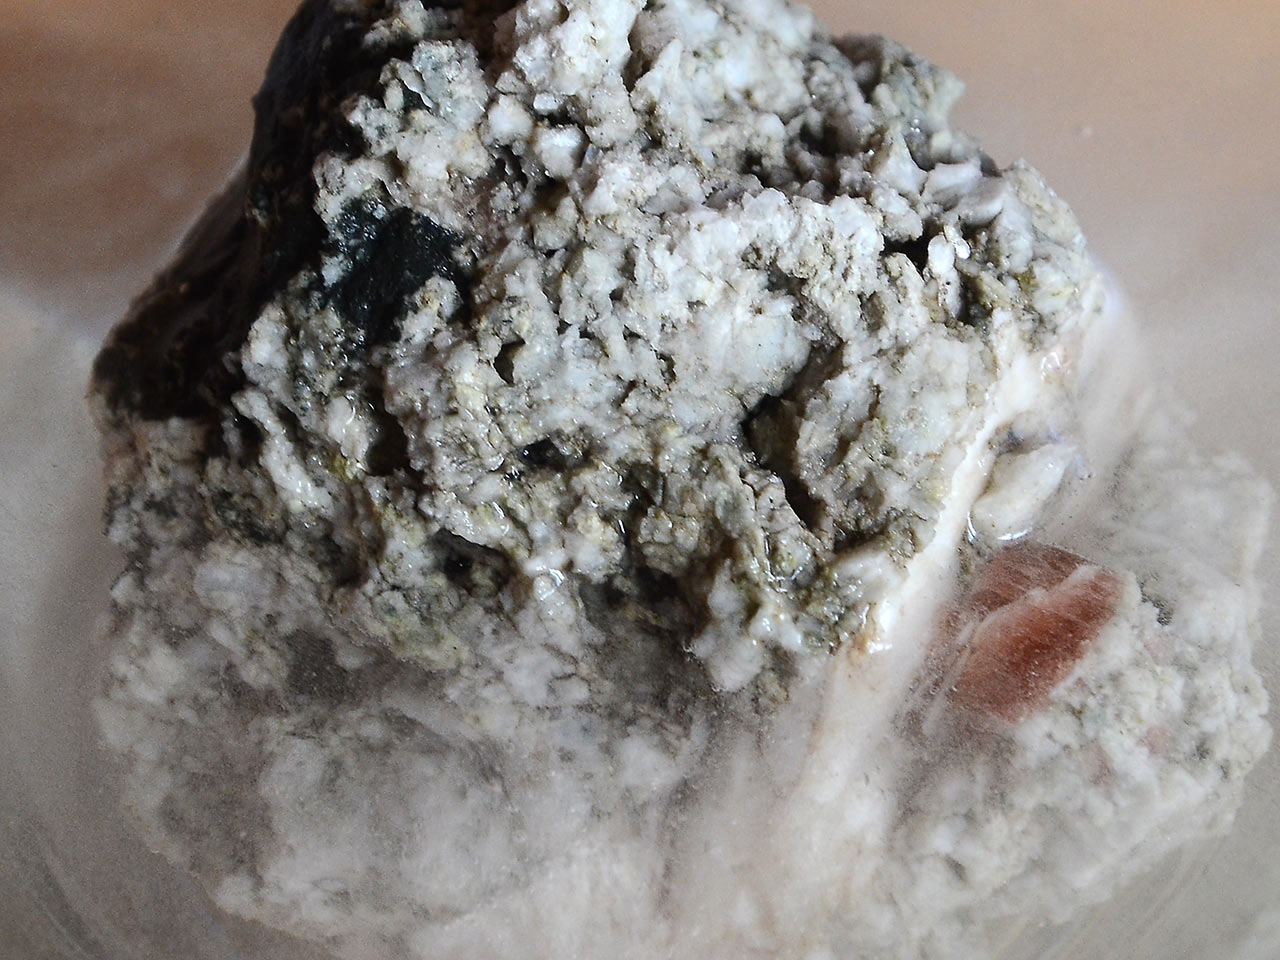 Removing excess calcite from mineral specimen by hydrochloric acid